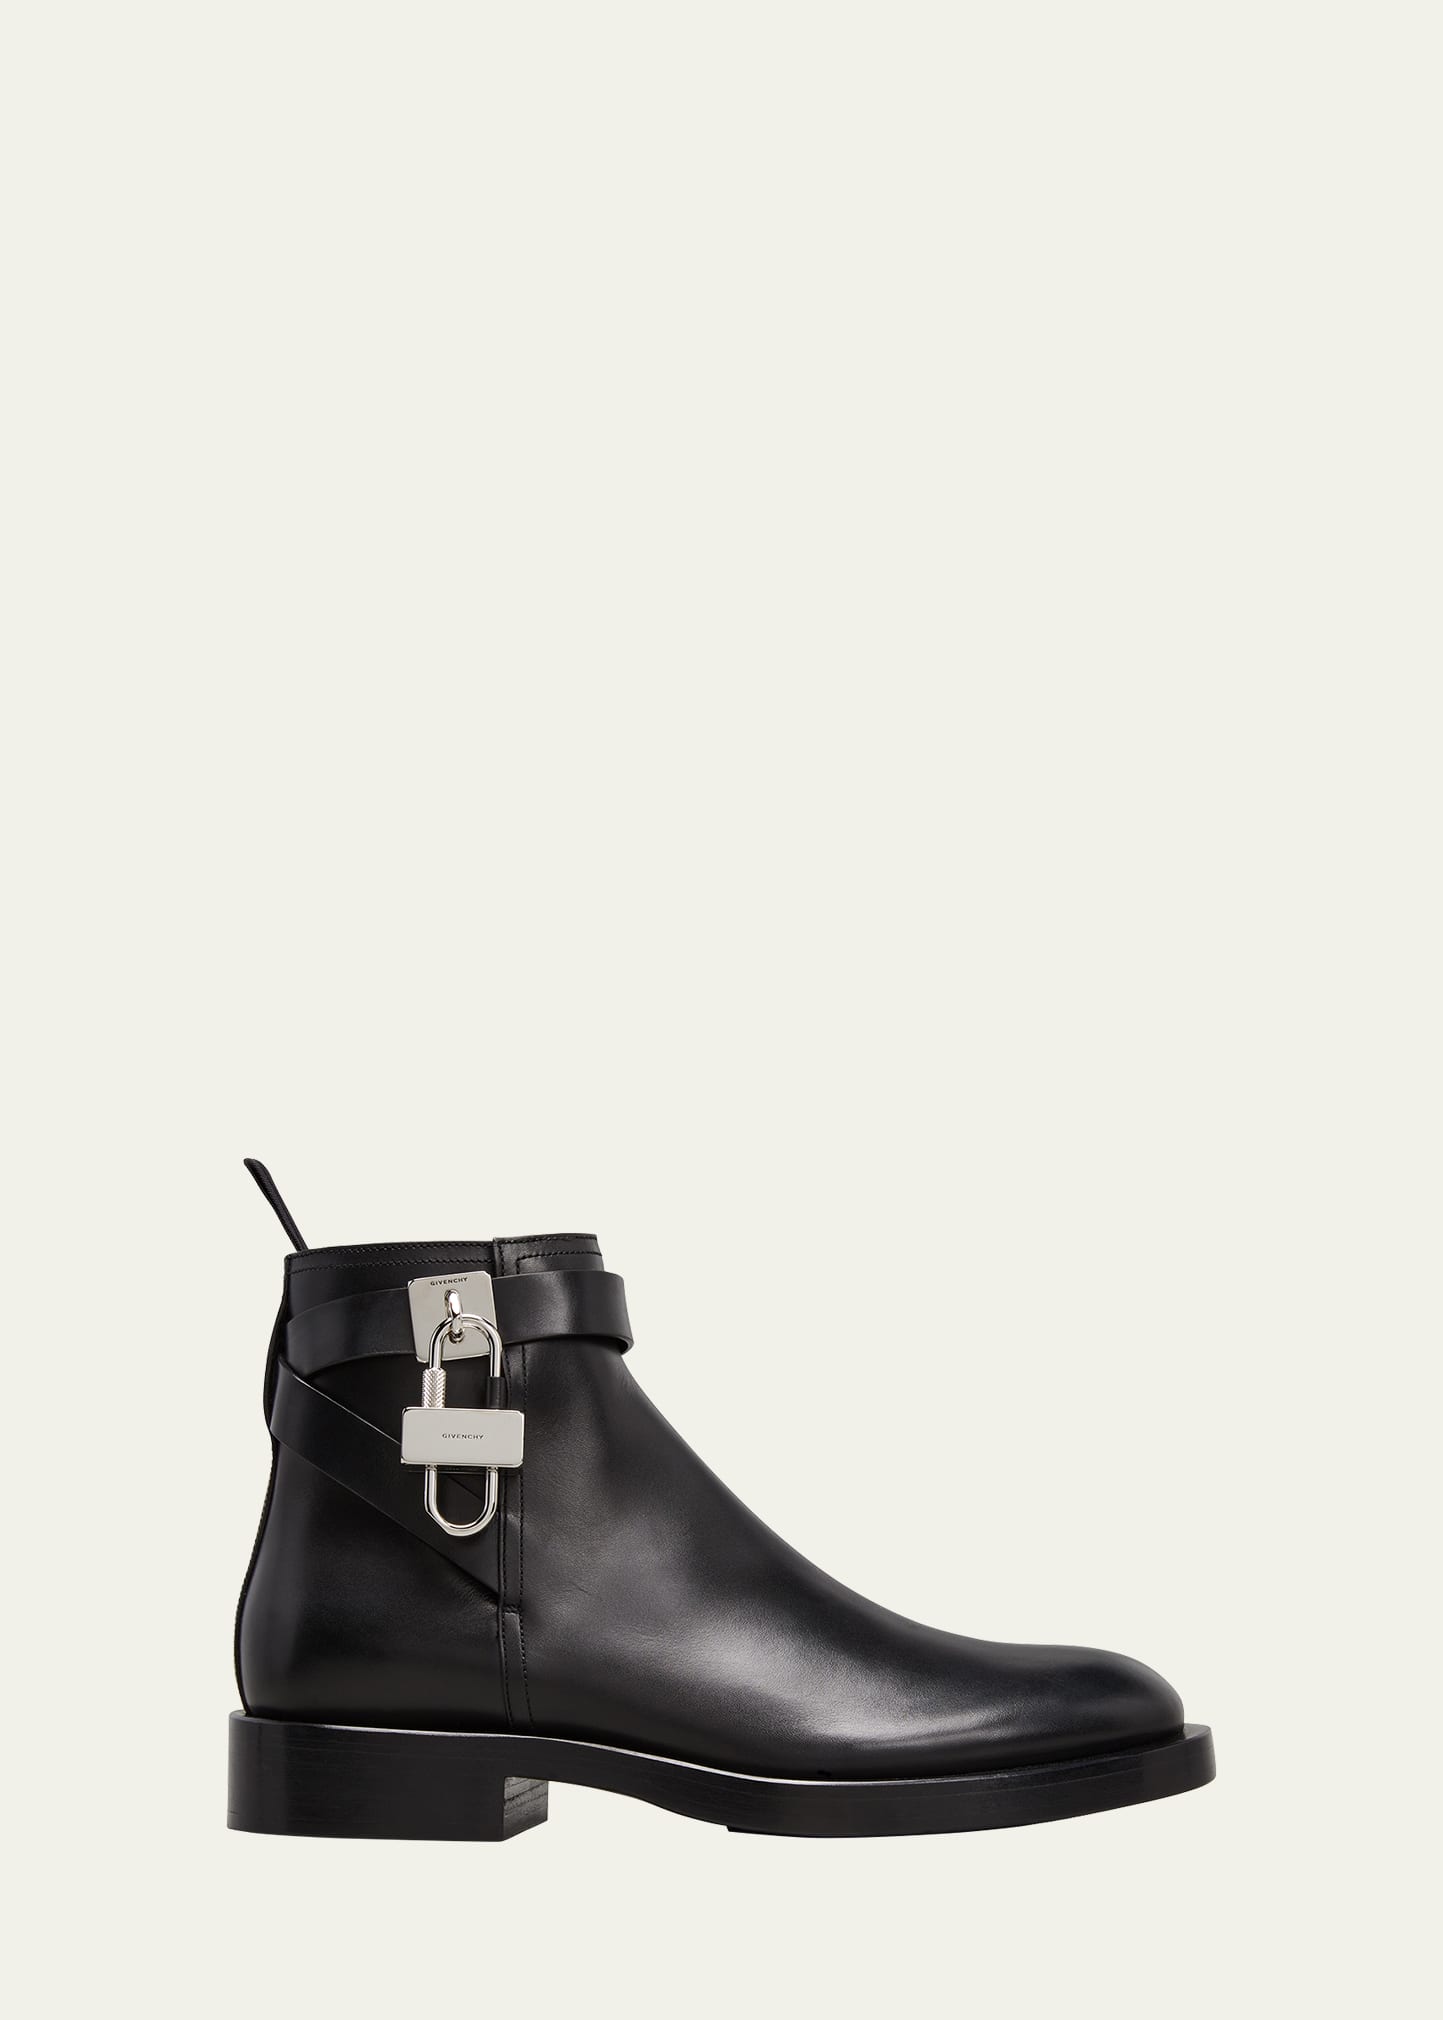 Men's Padlock Leather Ankle Boots